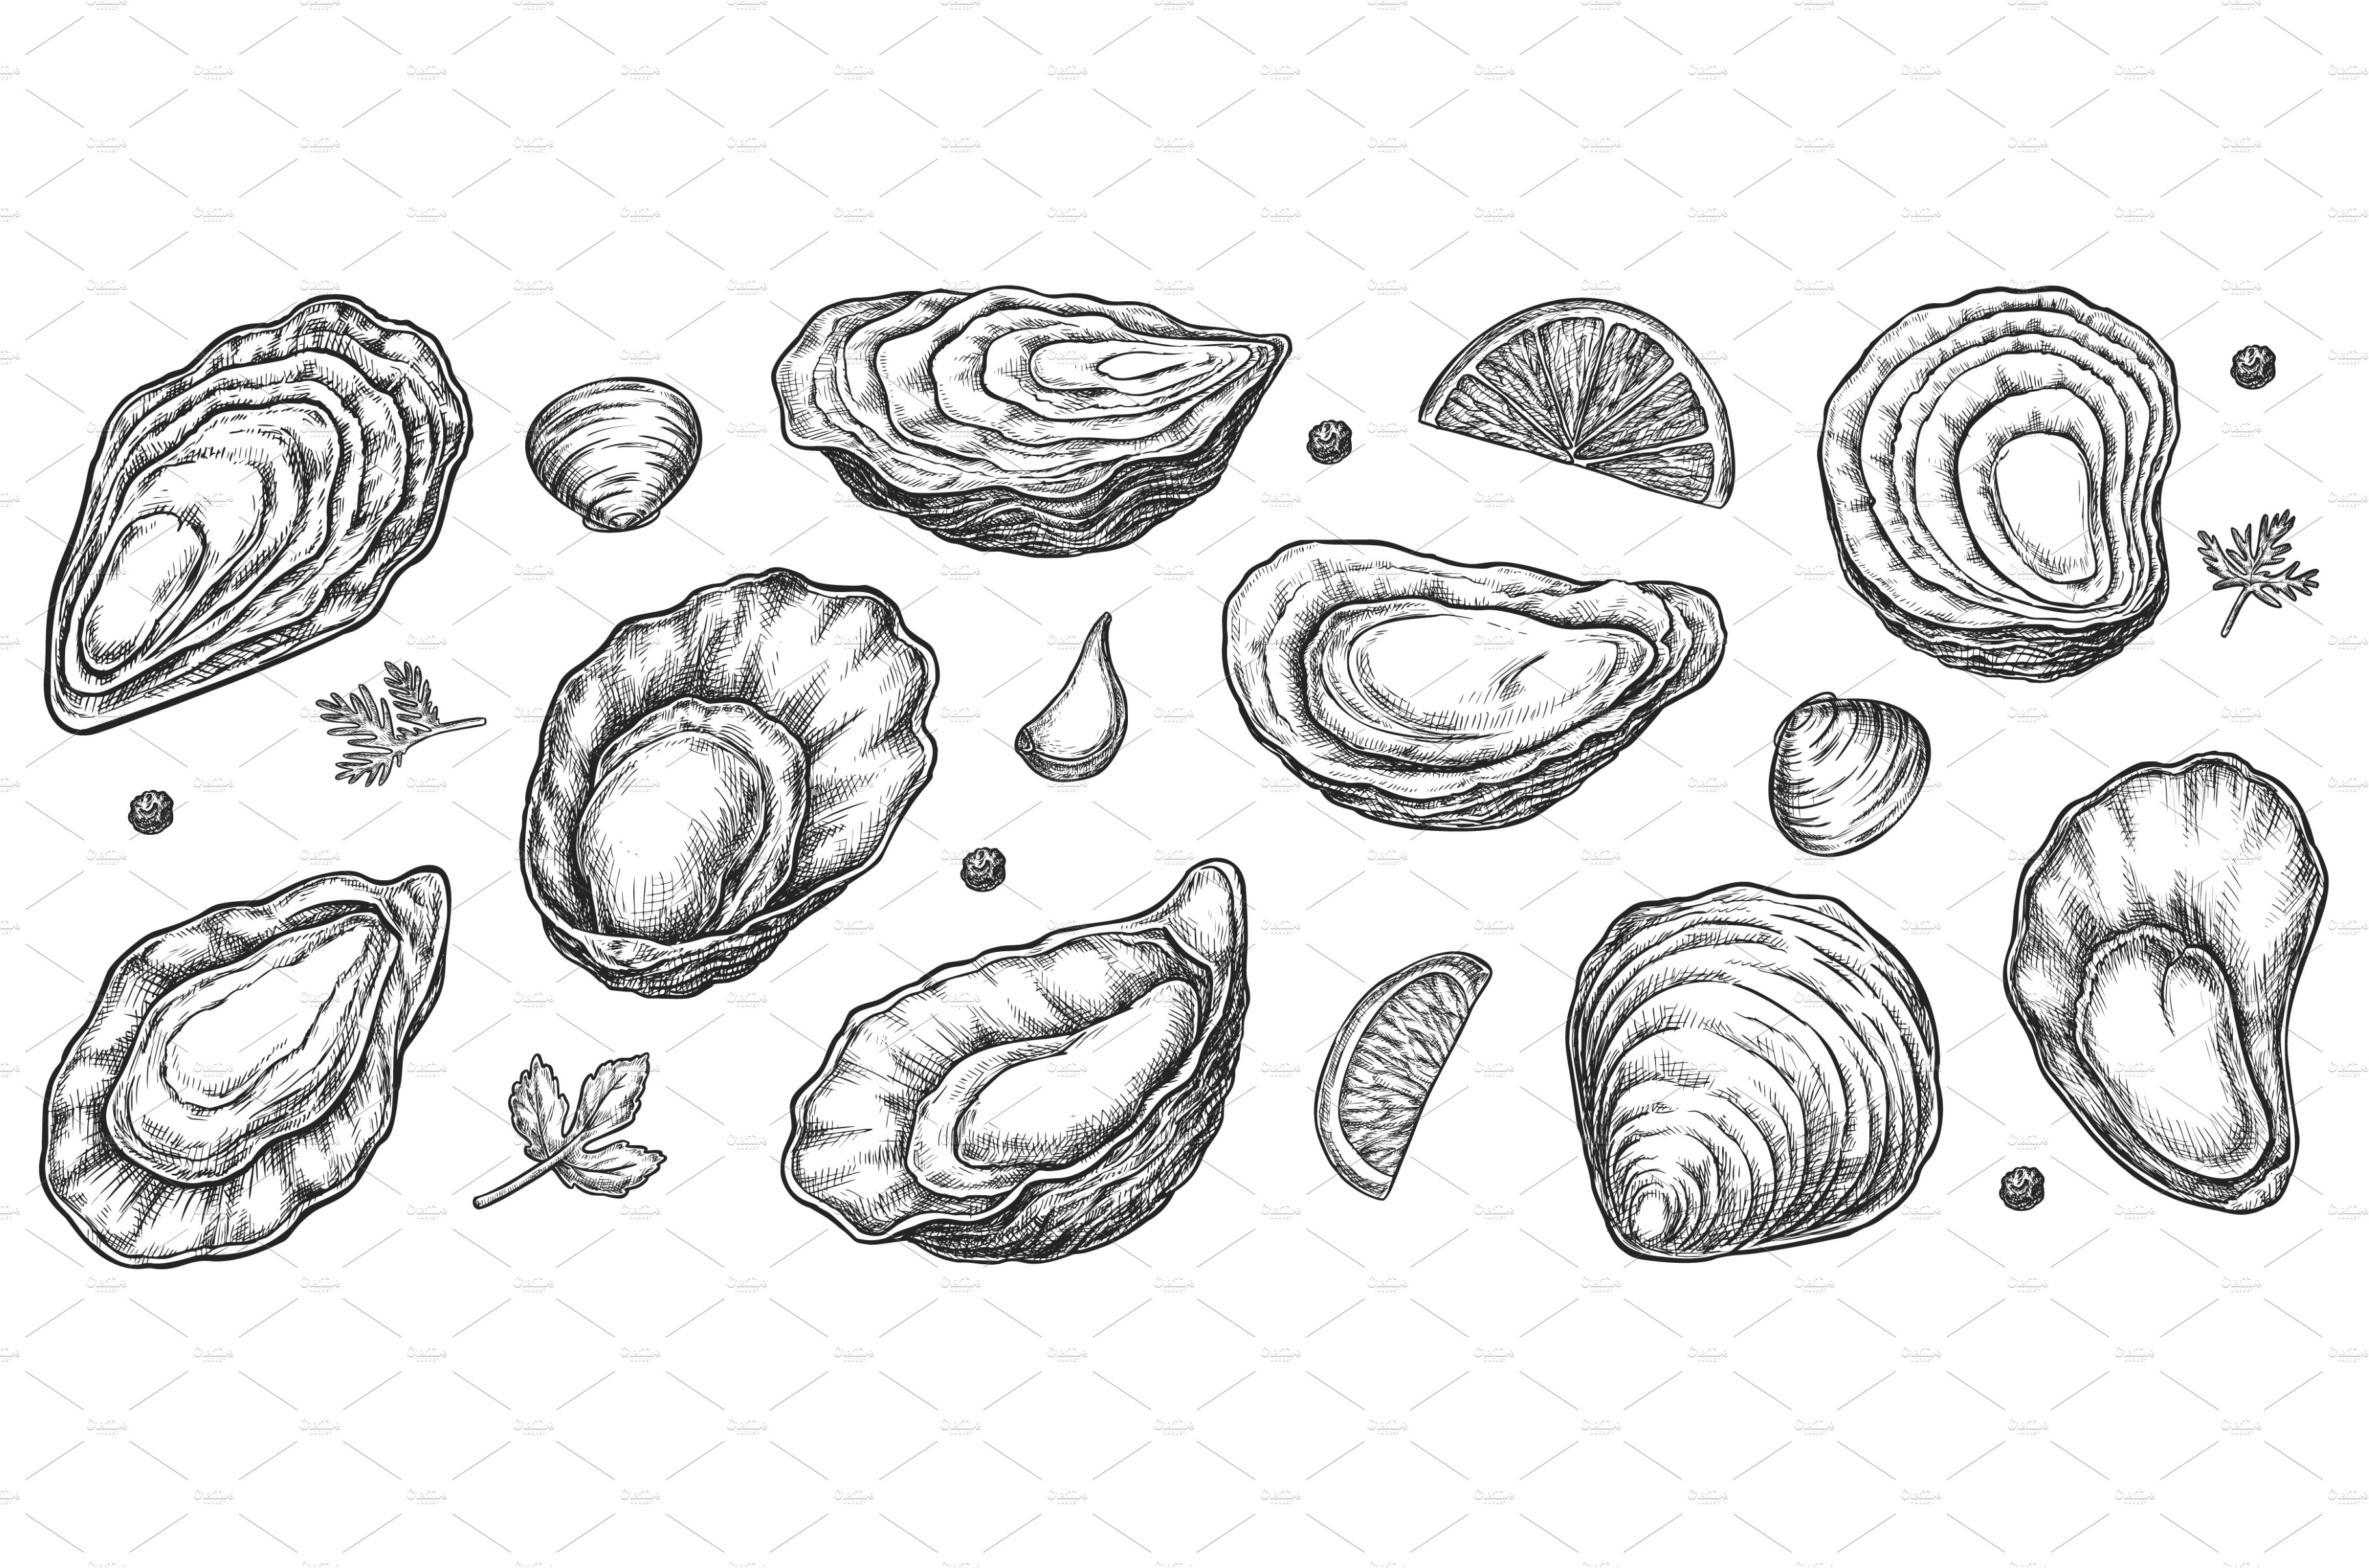 Sea oyster shell sketch isolated set cover image.